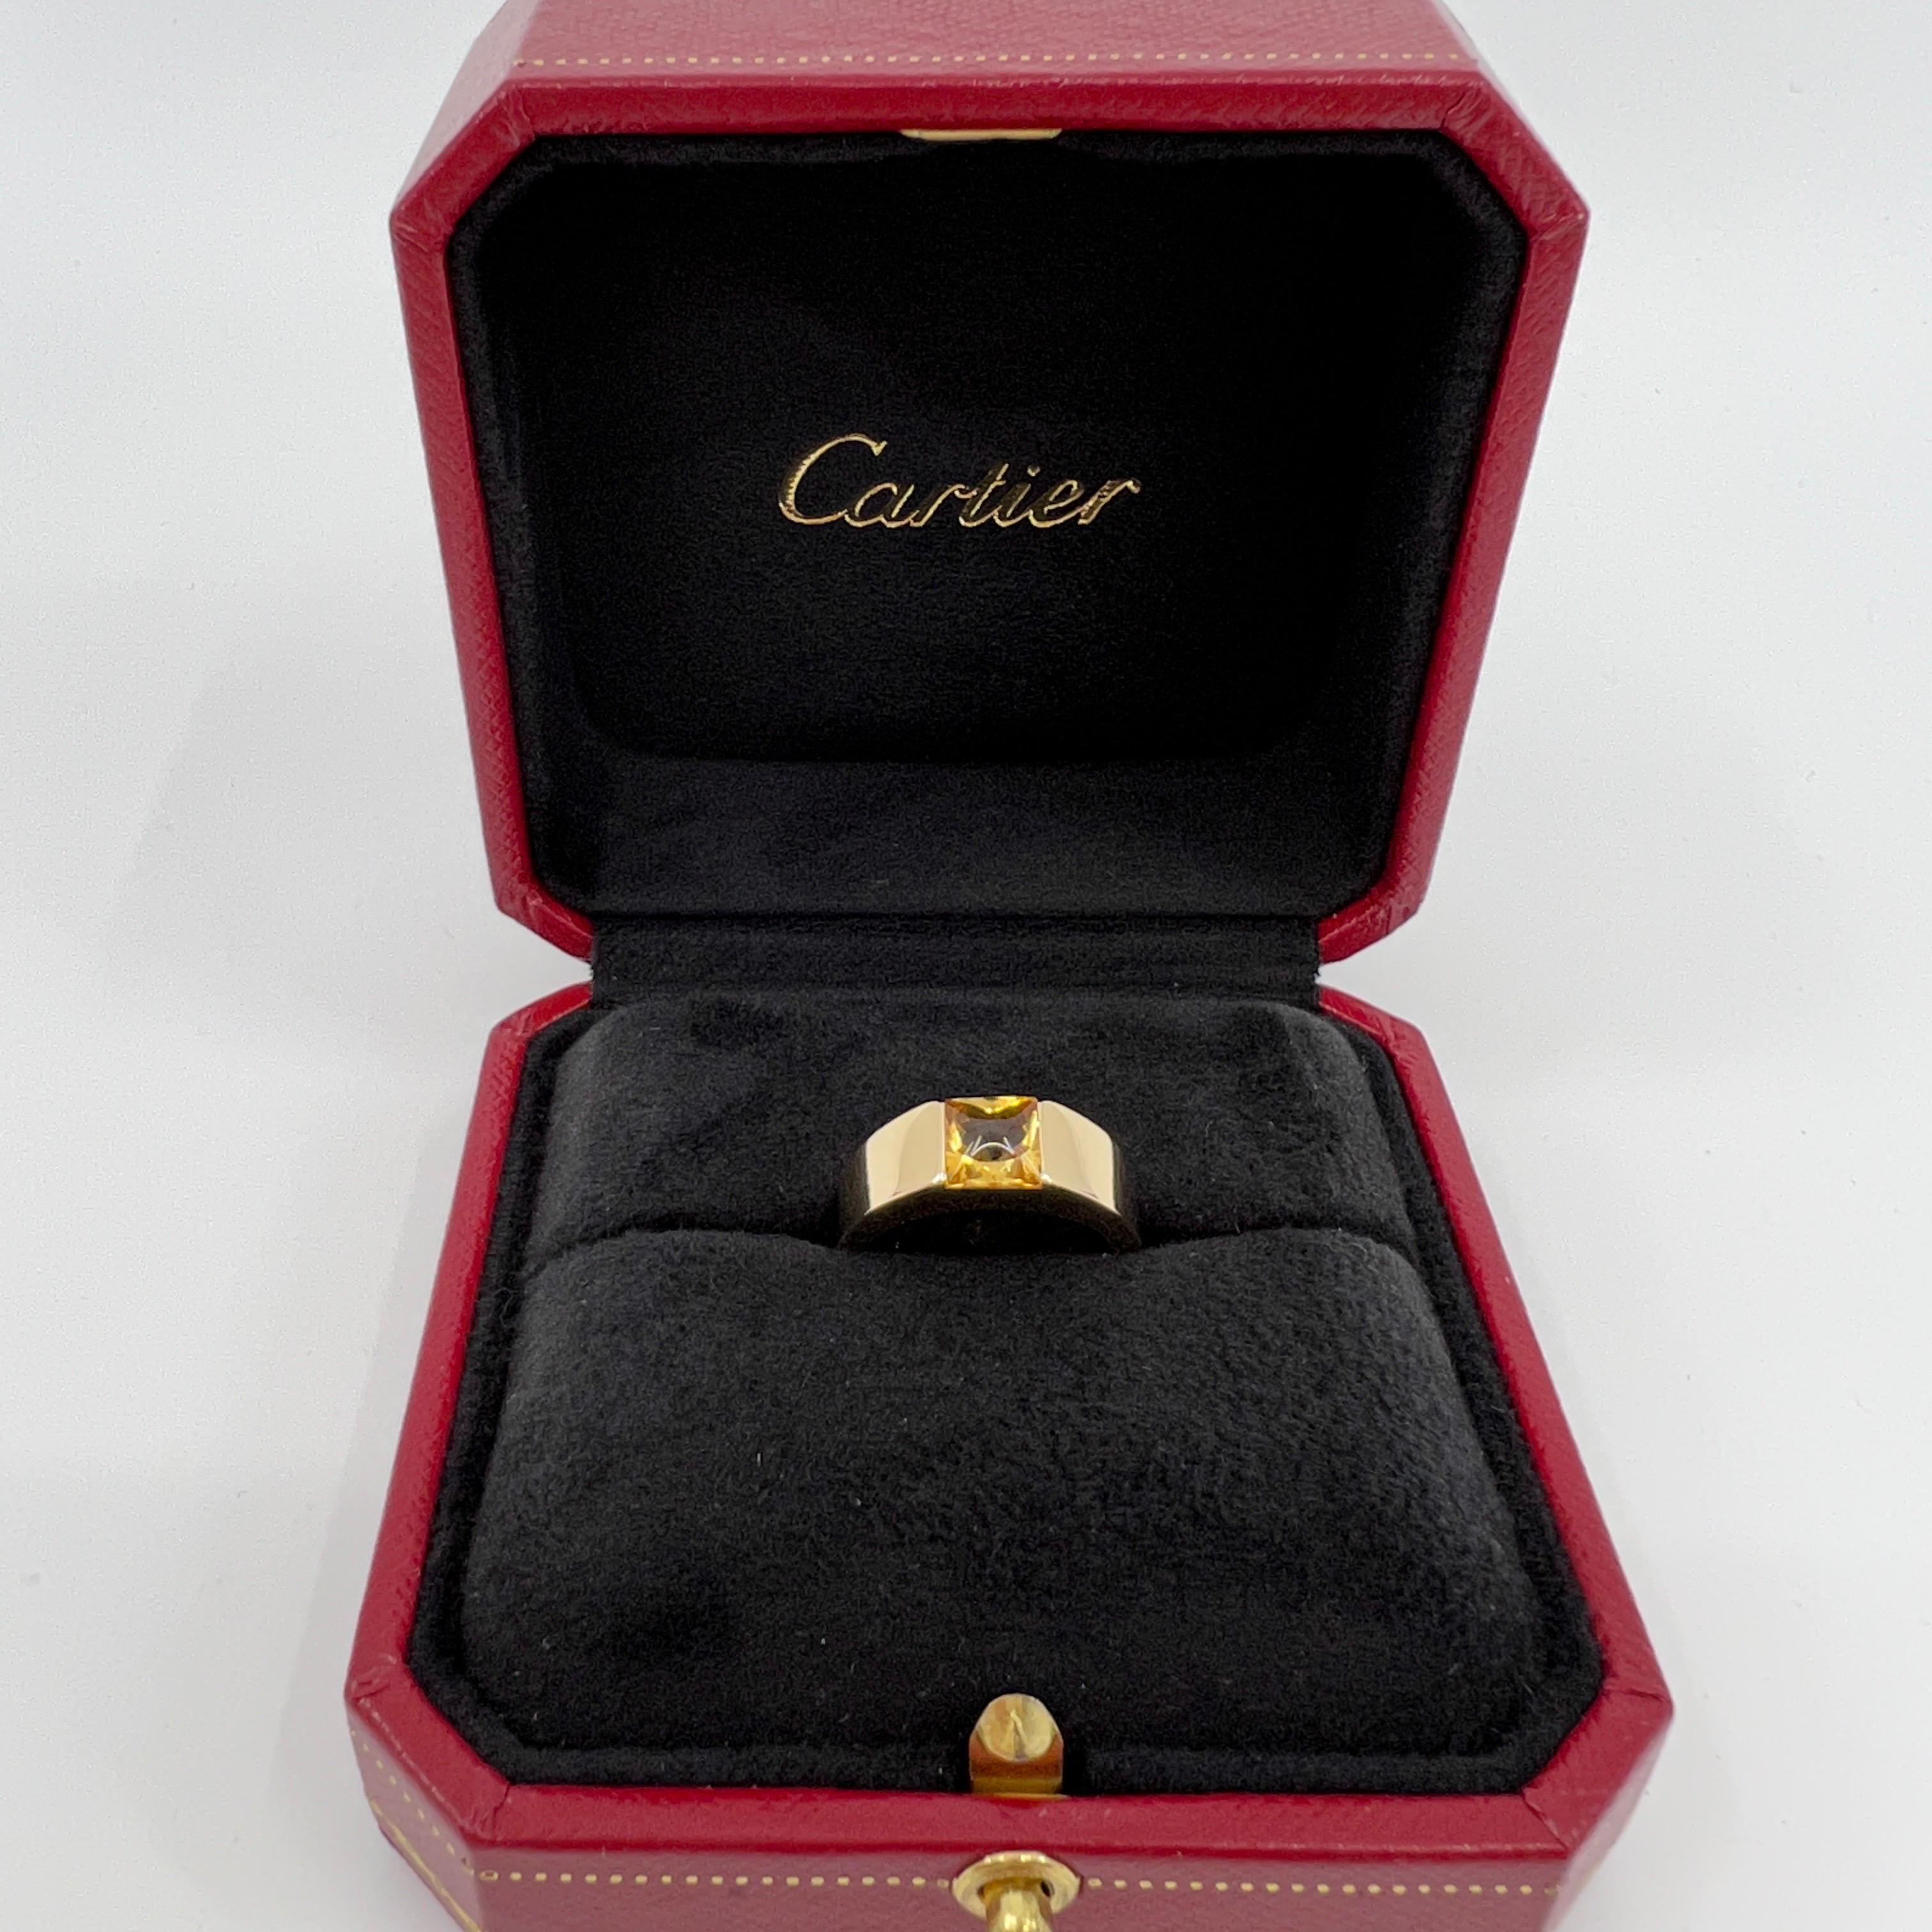 Cartier Vivid Yellow Orange Citrine 18k Yellow Gold Tank Ring.

Stunning yellow gold ring with an 8mm tension set vivid yellow orange citrine. Fine jewellery houses like Cartier only use the finest of gemstones and this citrine is no exception. A